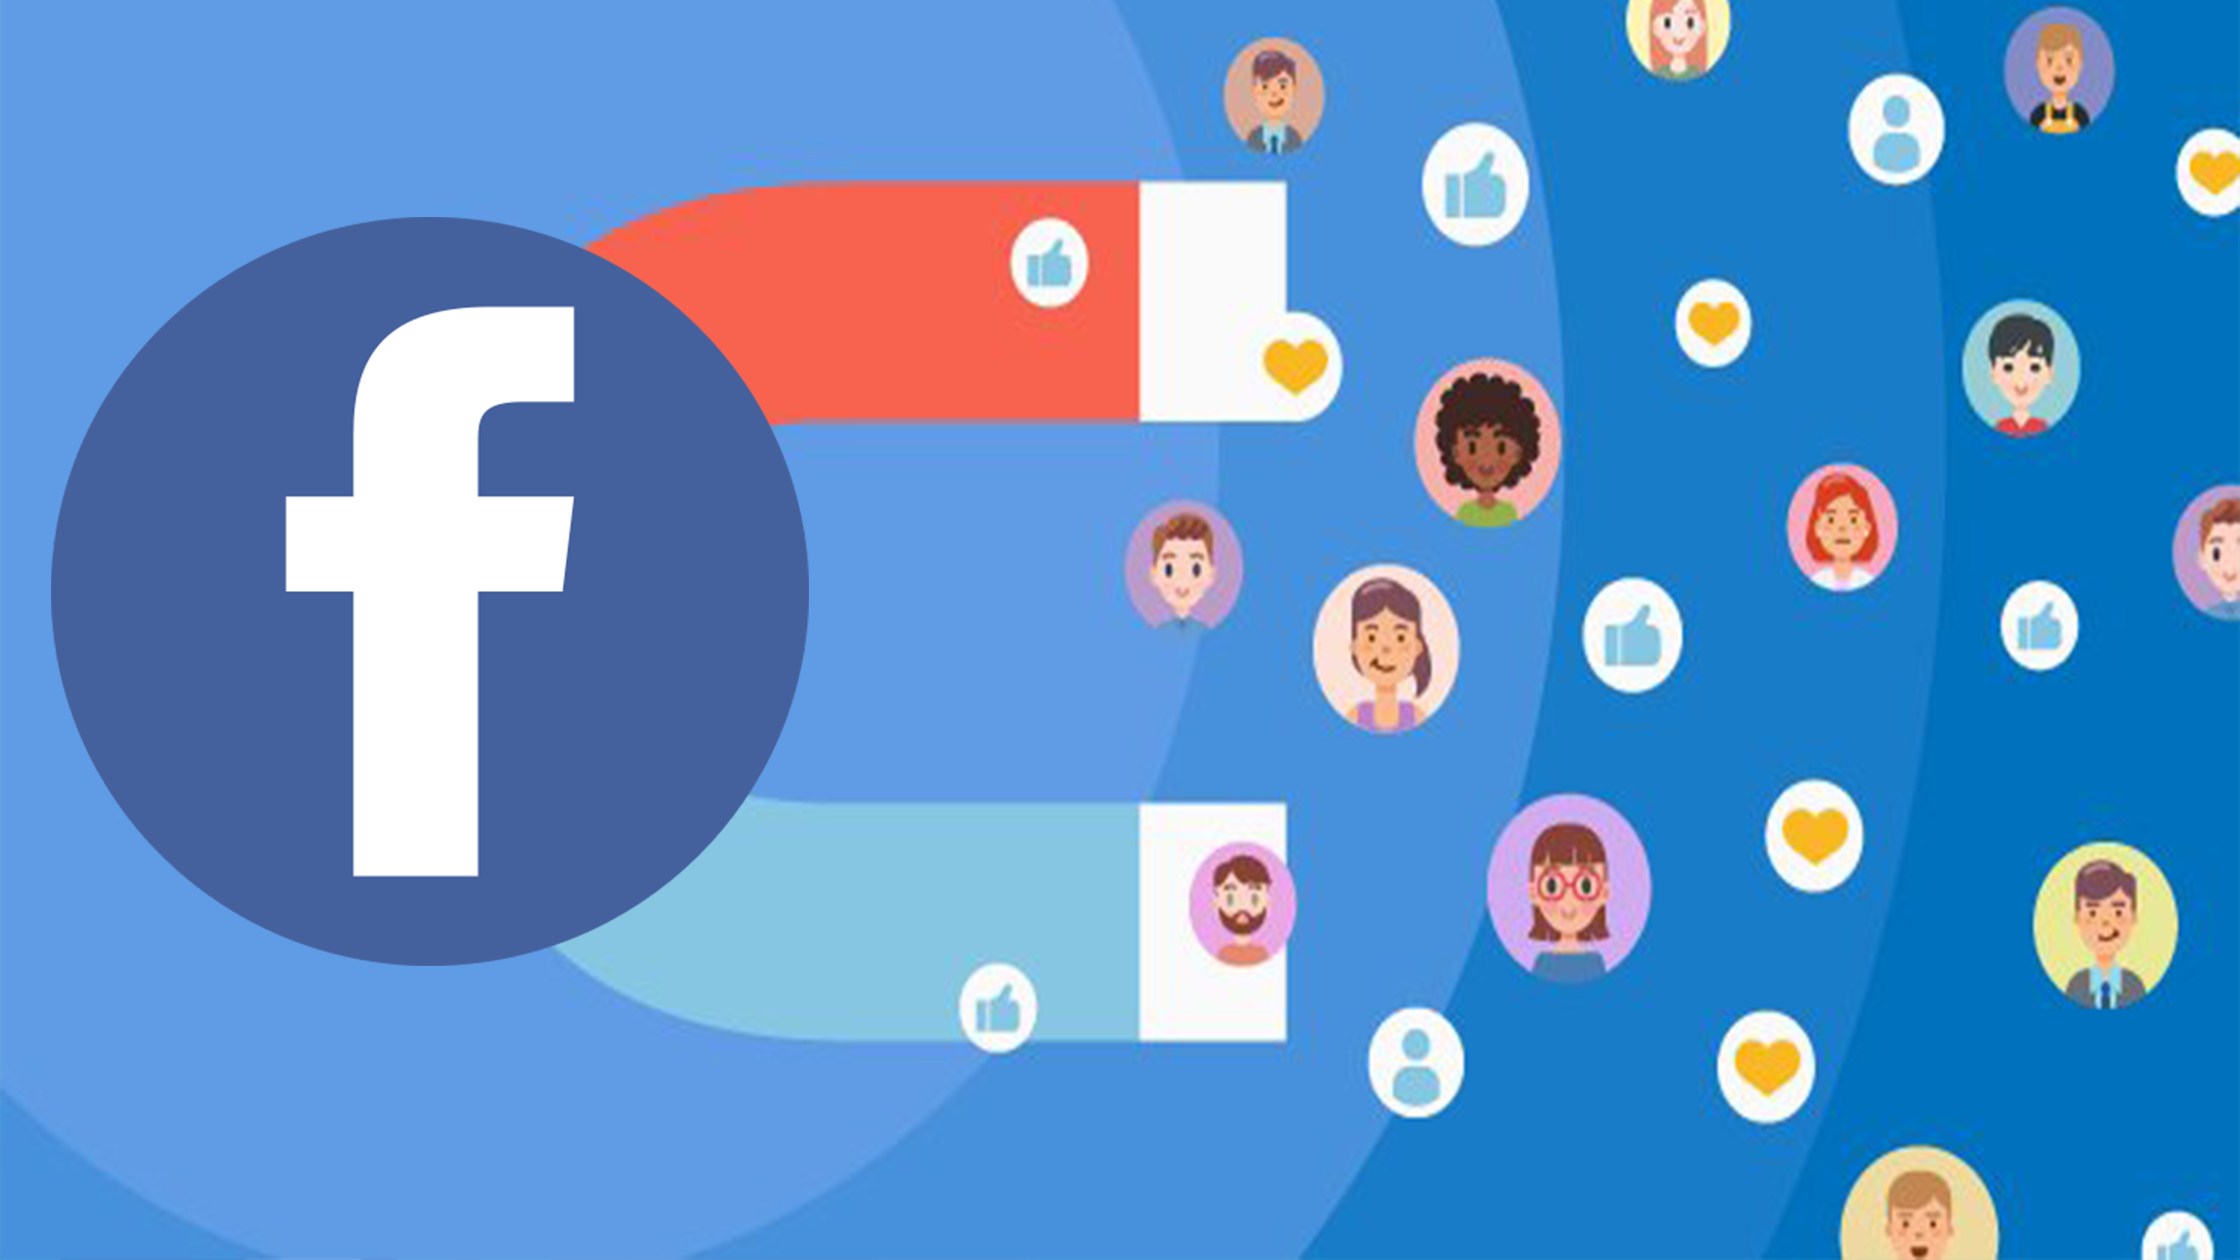 How to hire candidates from Facebook?